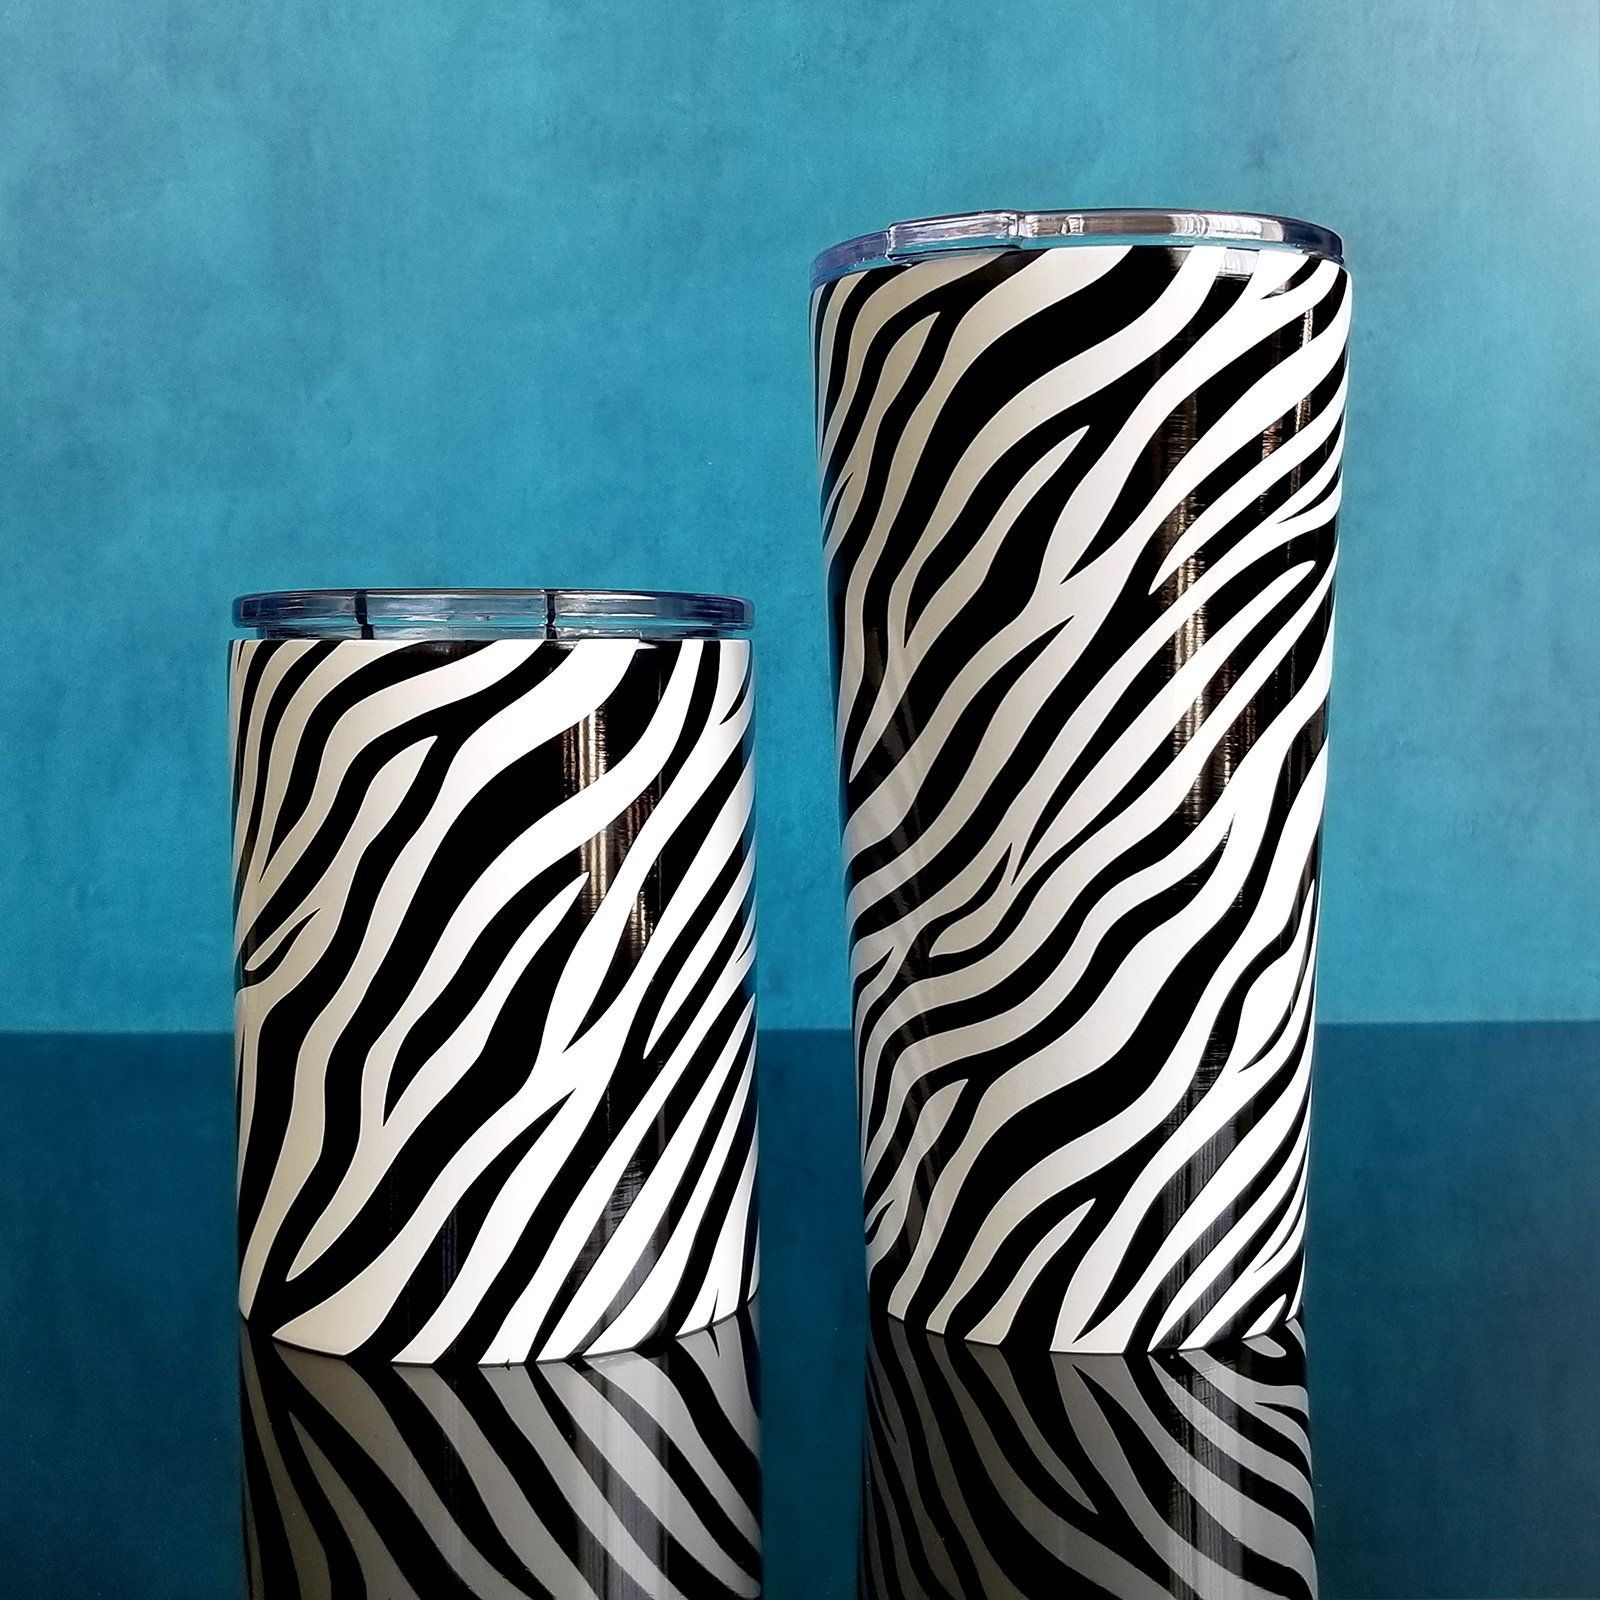 Zebra Print Pattern Tumbler Cups (10oz and 20oz) on blue and glossy black background - Amy's Coffee Mugs